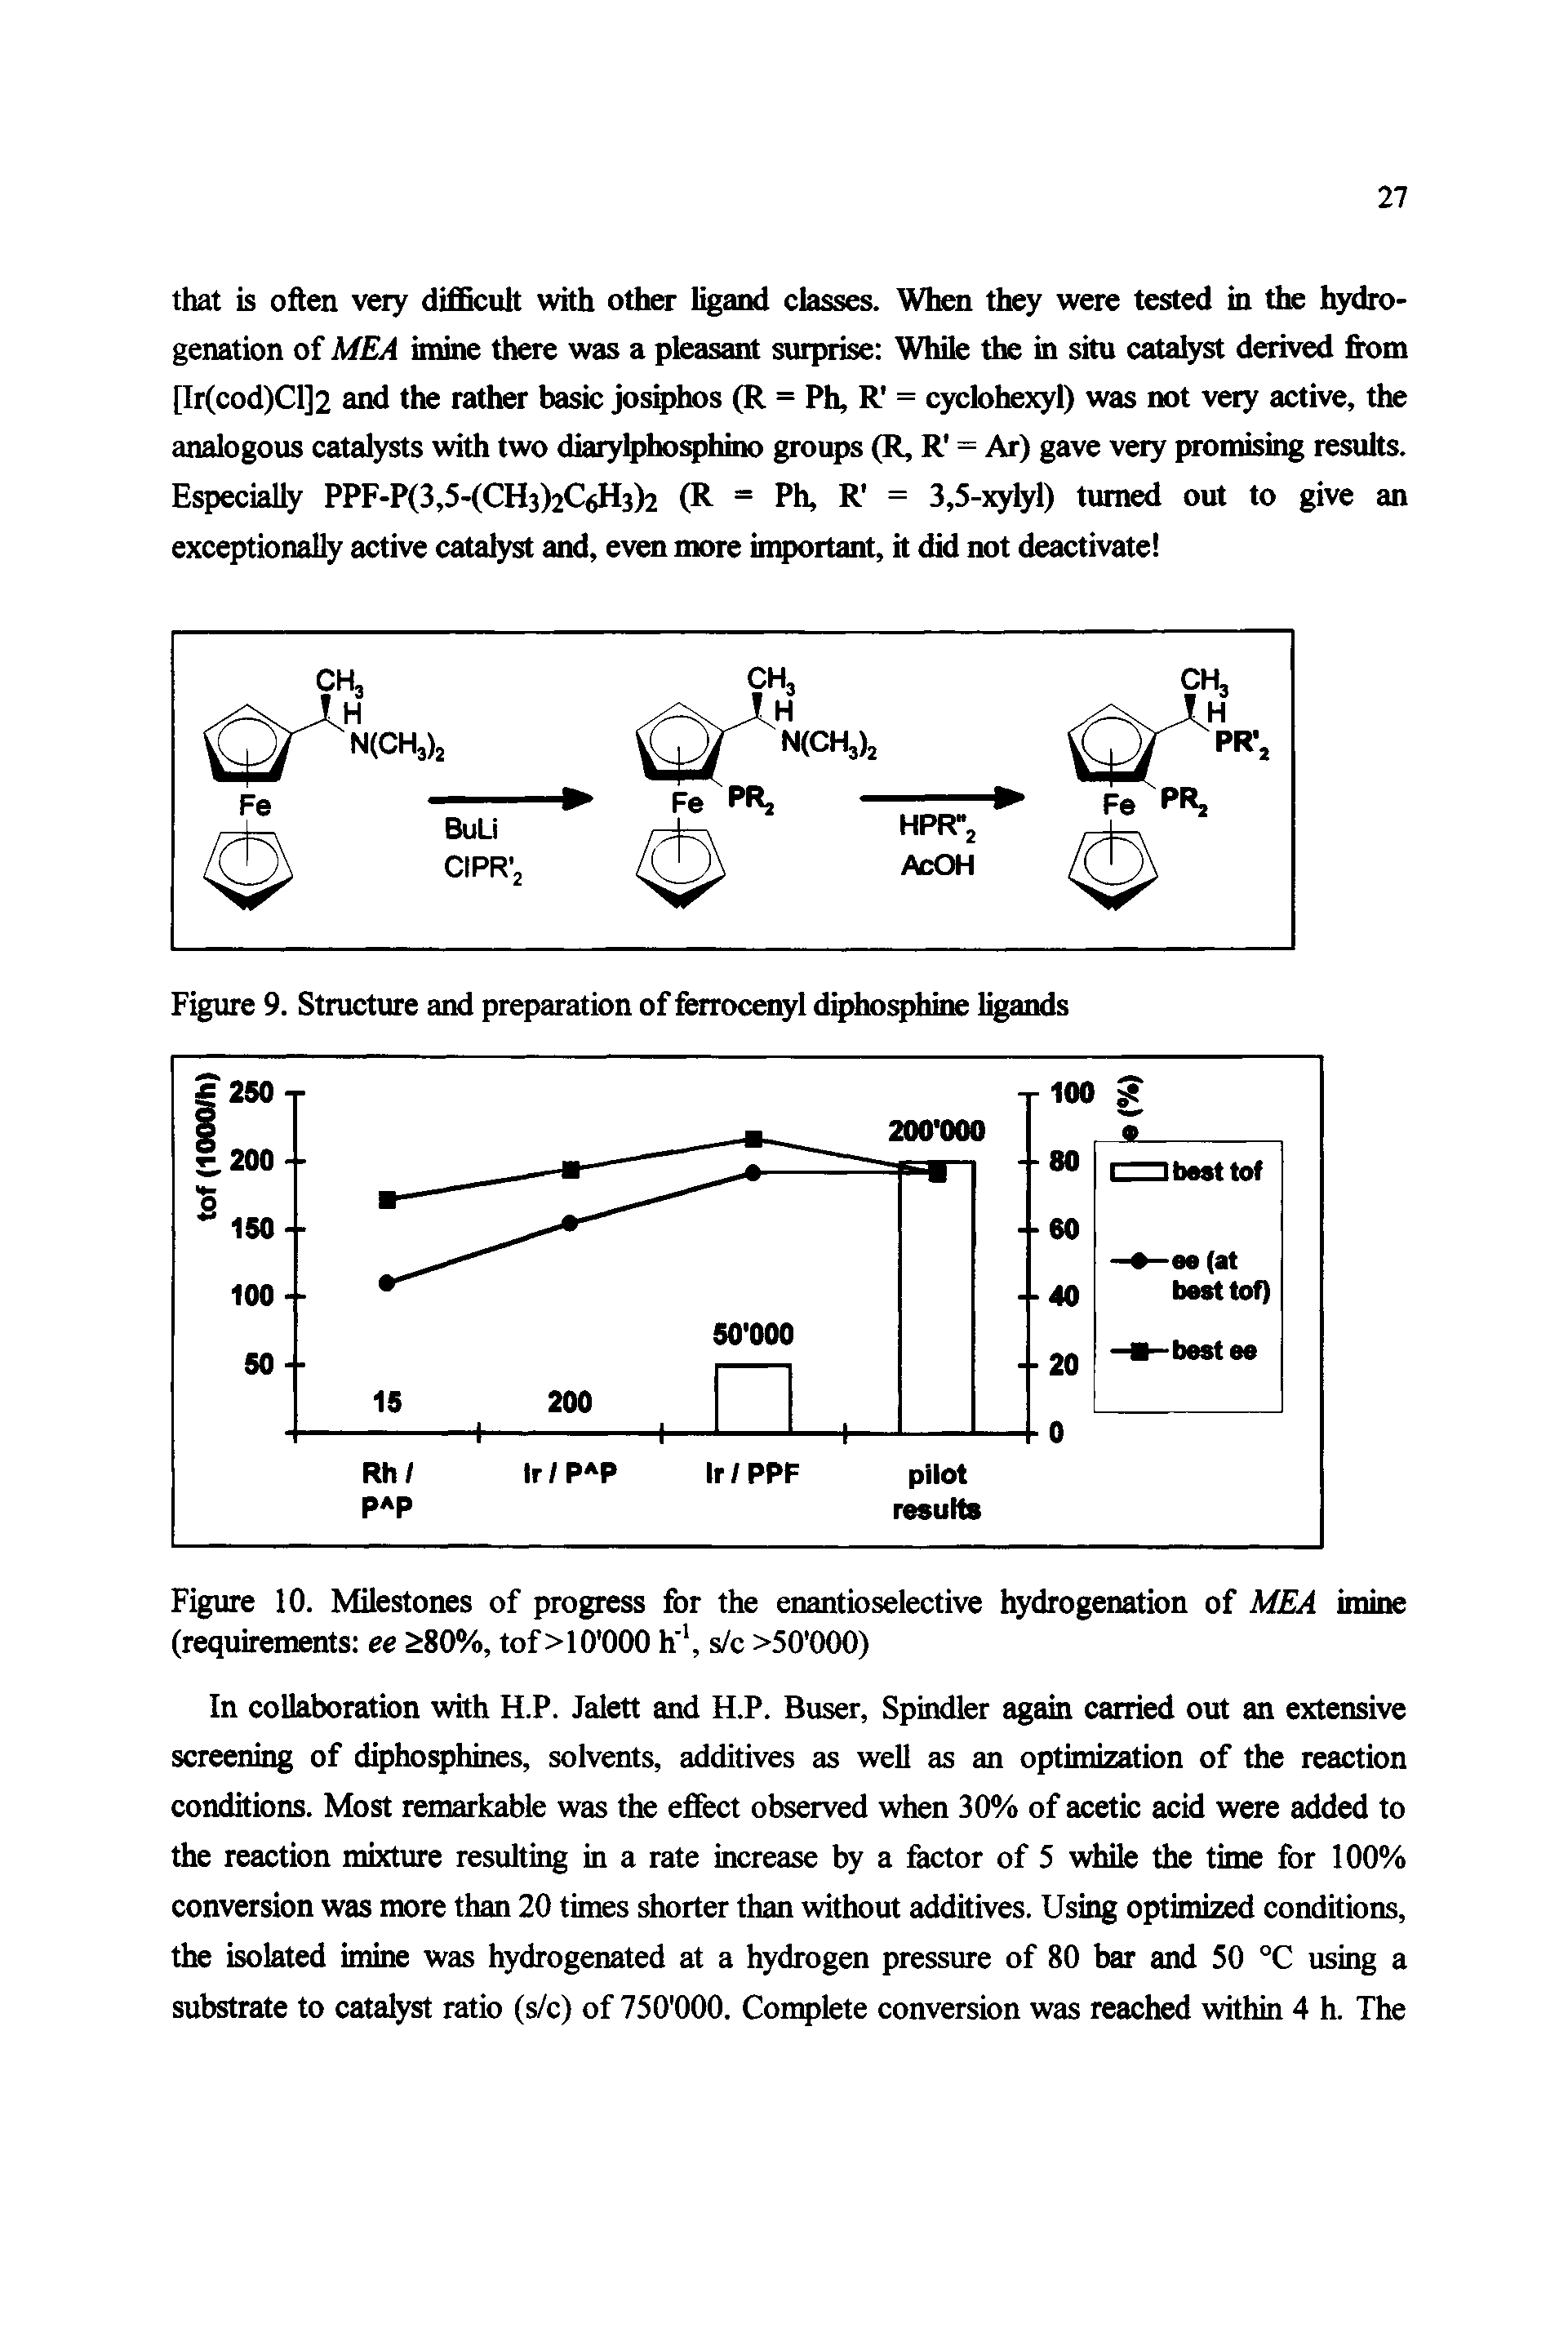 Figure 10. Milestones of progress for the enantioselective hydrogenation of MEA imine (requirements ee 80%, tof >10 000 h, s/c >50 000)...